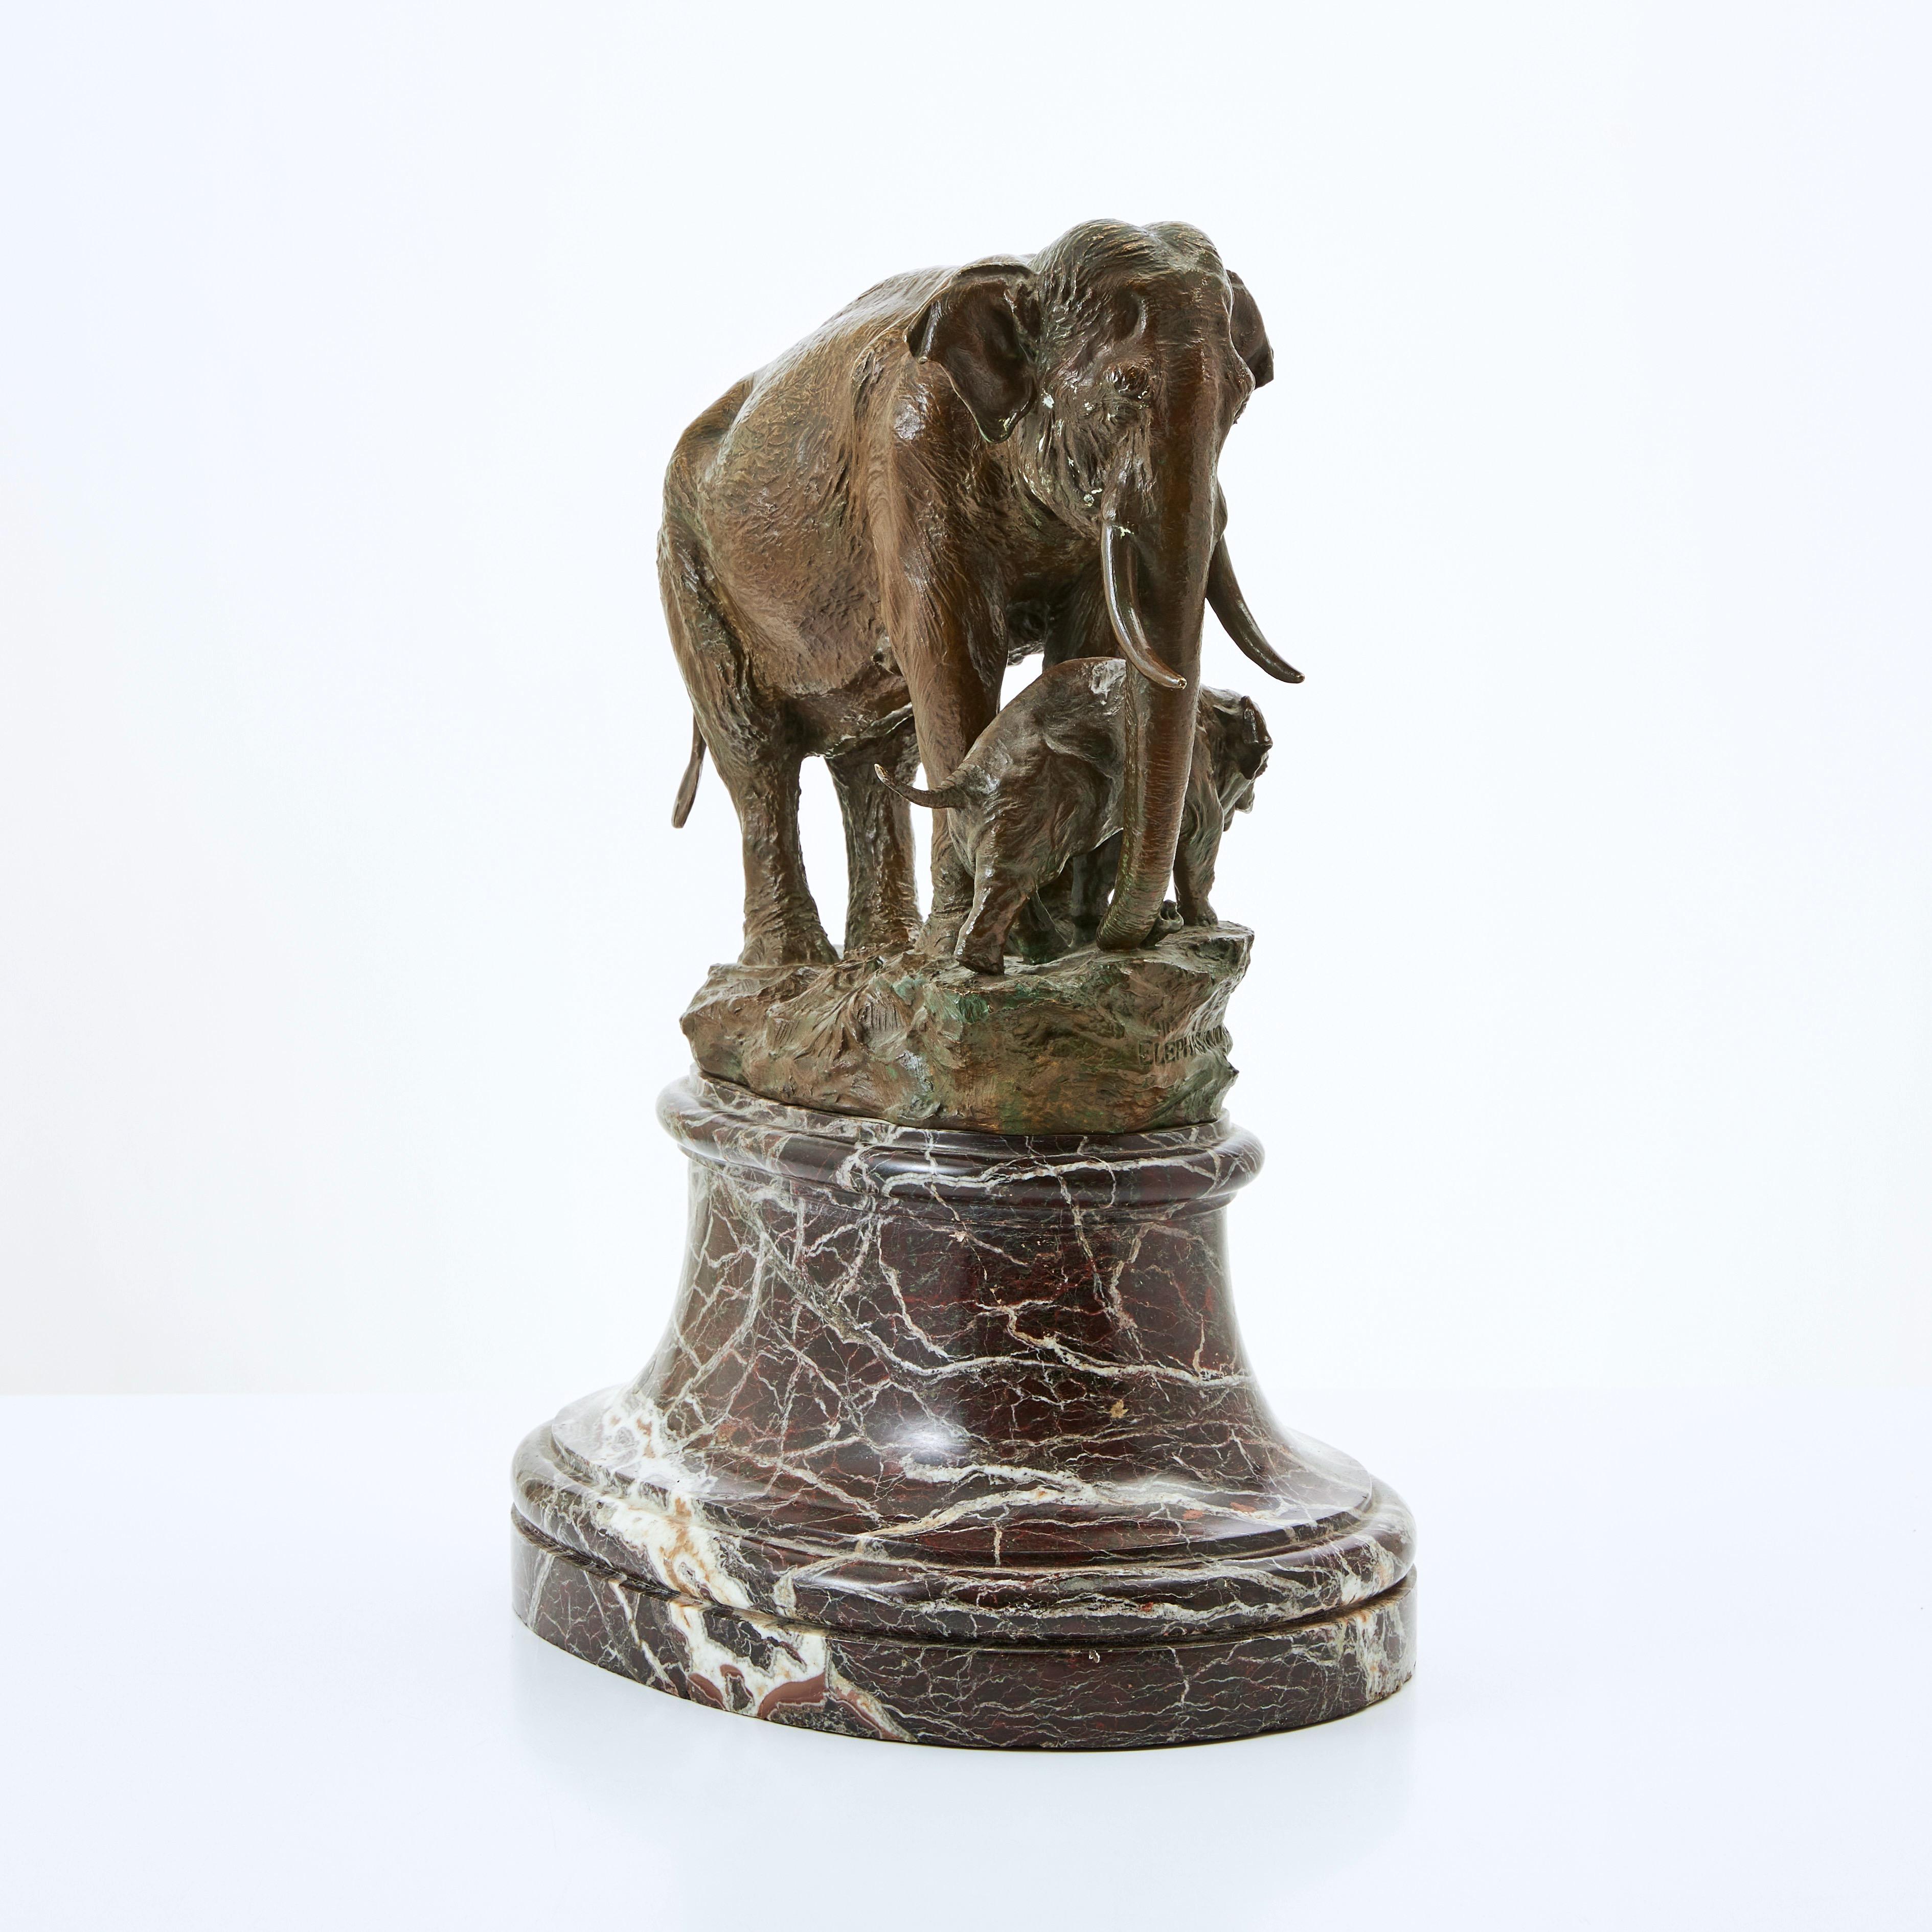 Niels Holm Figurative Sculpture - Elephant Sculpture, Bronze, Mother and Baby Elephant 19th Century, Marble Base. 